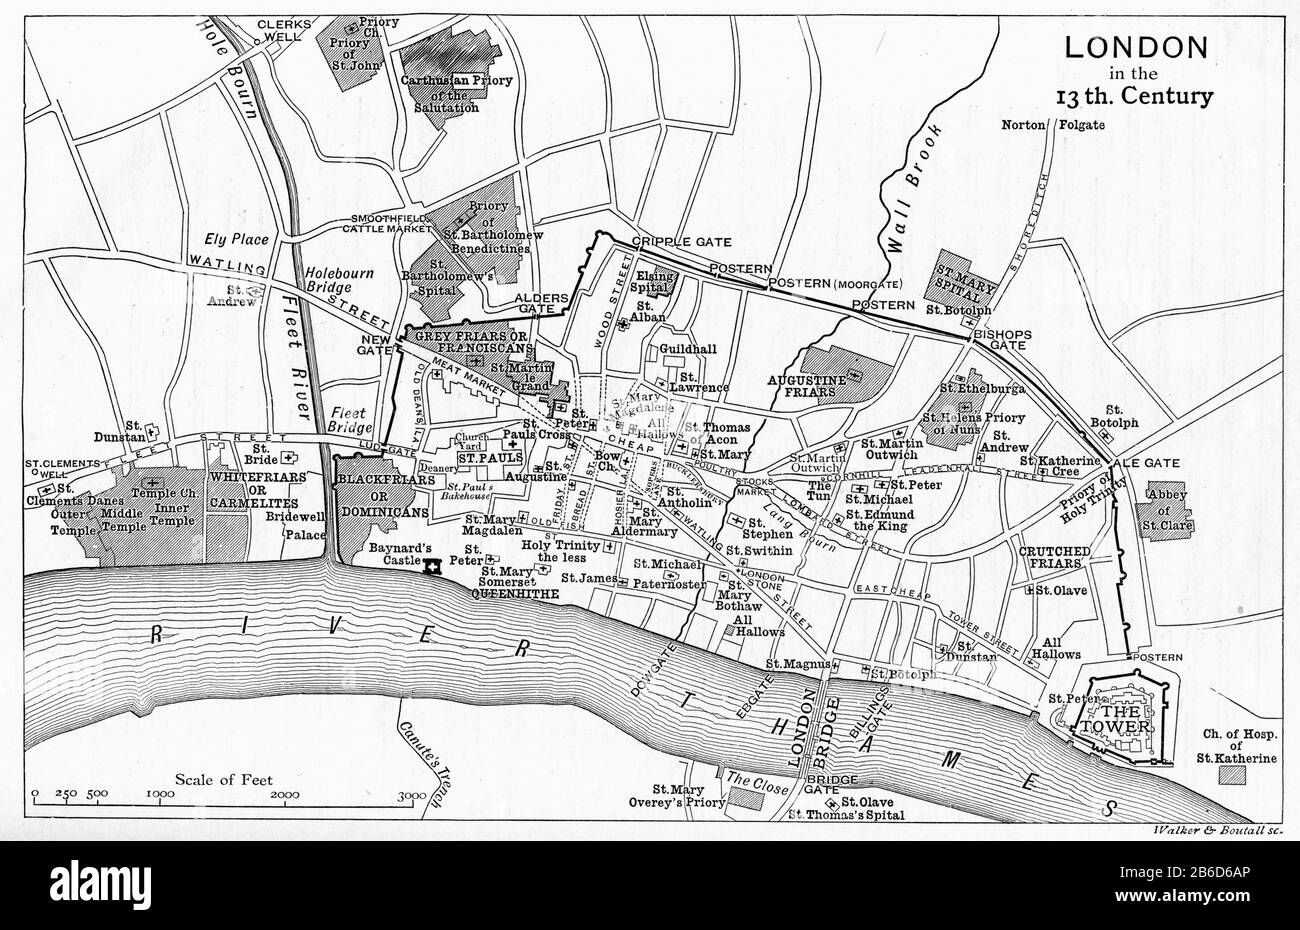 A map of London in the 13th century. In the Middle Ages, Westminster was a small town up river from the City of London. From the 13th century onwards London grew up in two different parts. Westminster became the Royal capital and centre of government, whereas the City of London became the centre of commerce and trade, a distinction which is still evident to this day. Stock Photo